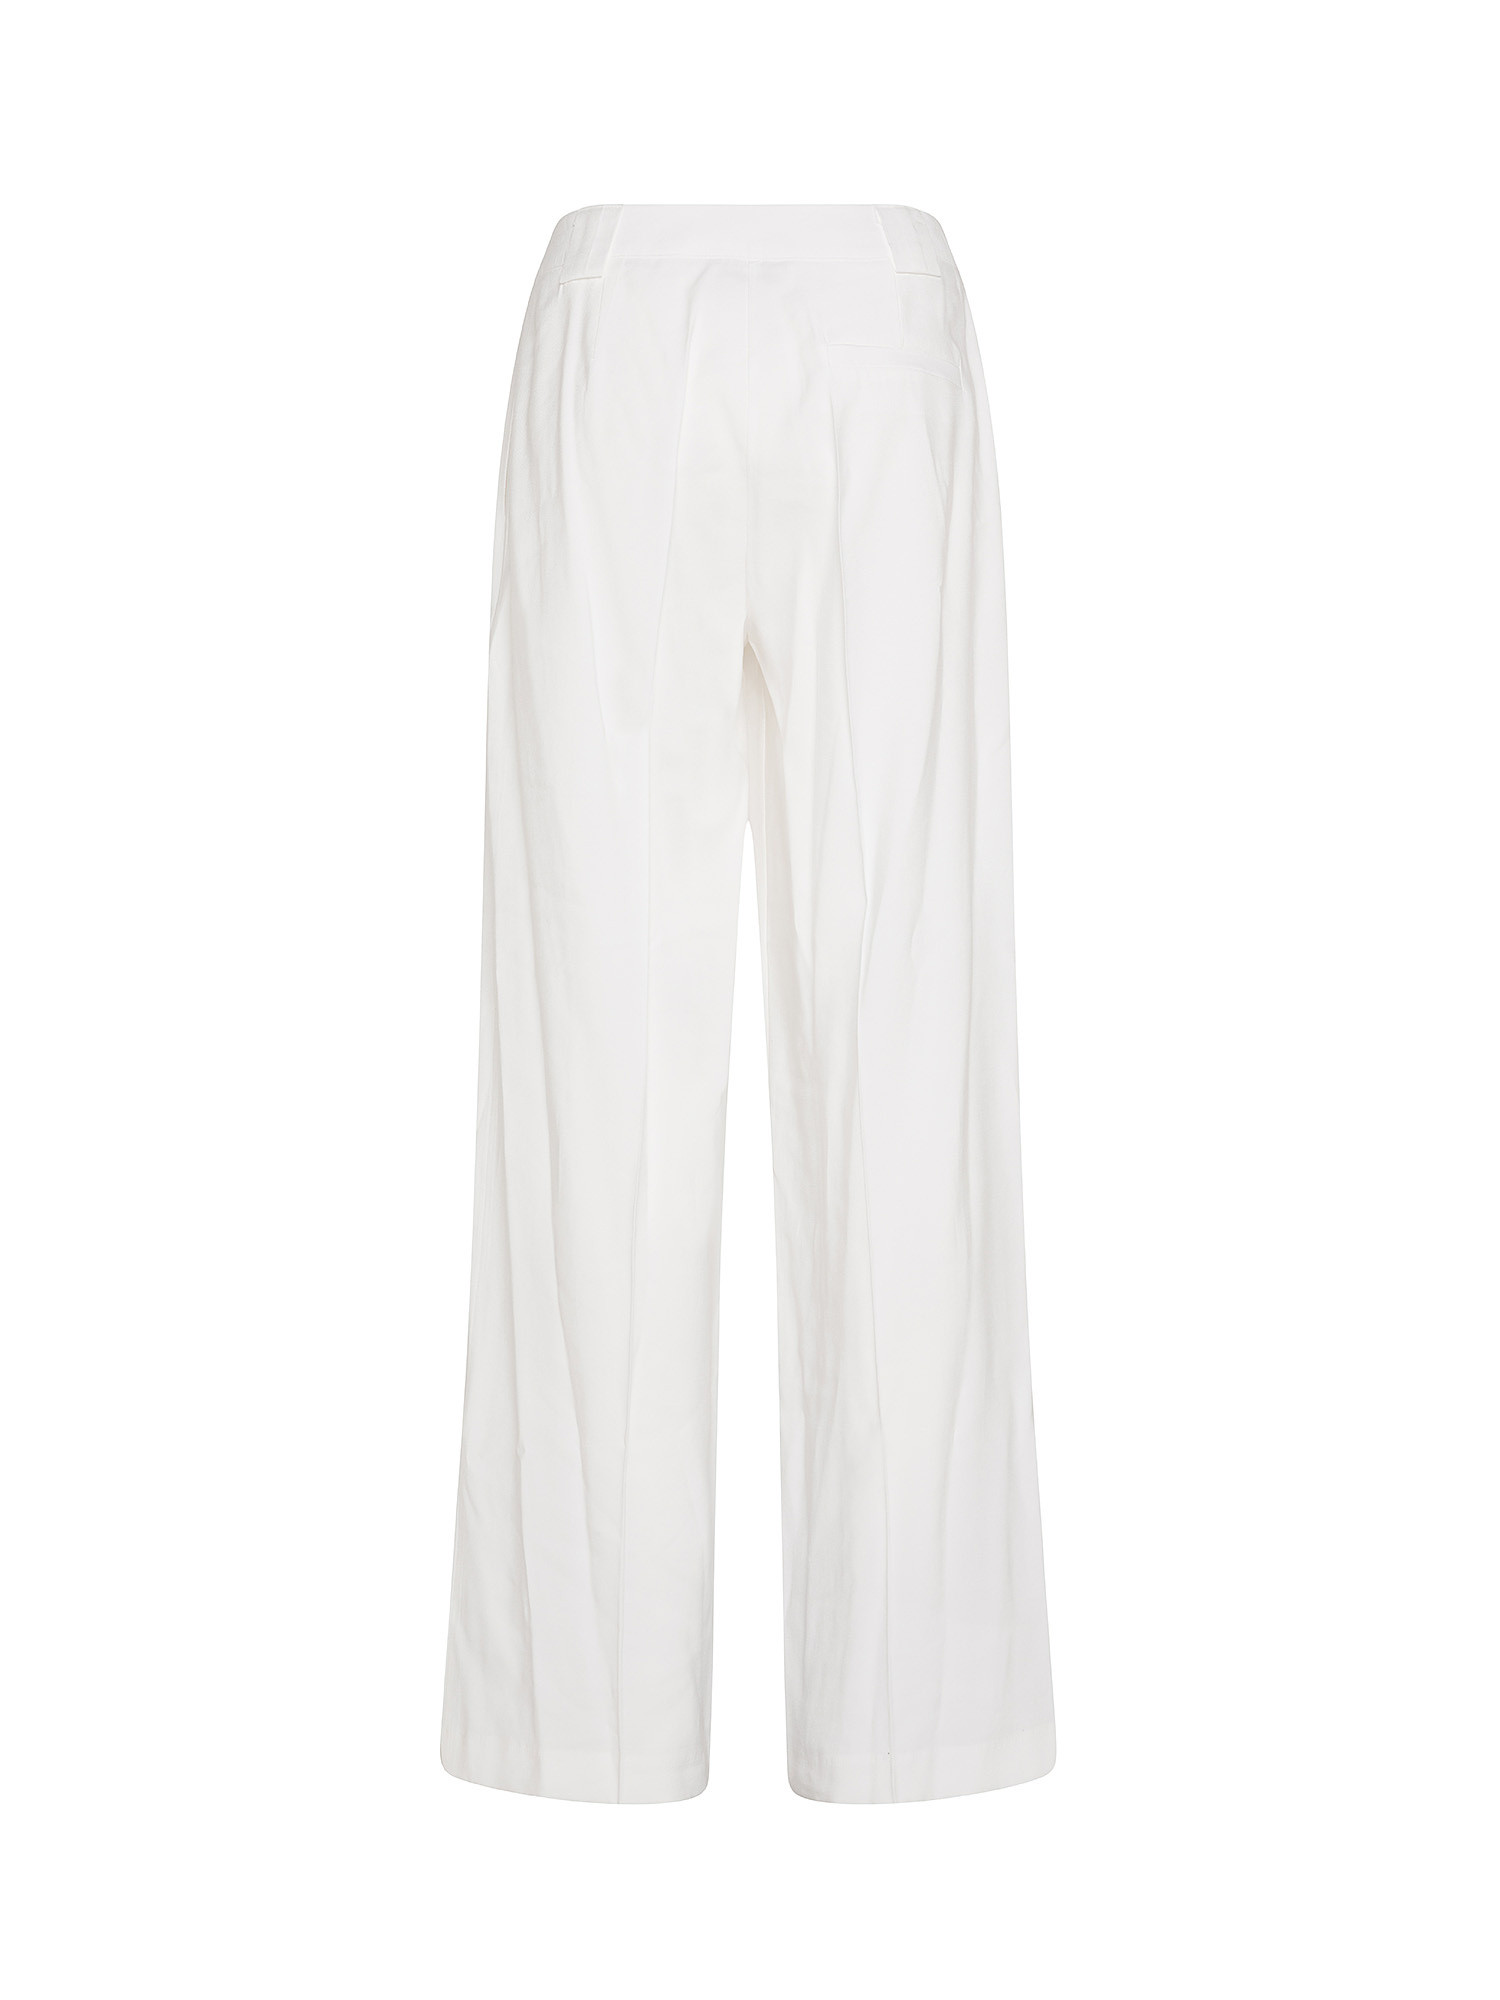 Trousers, White, large image number 1